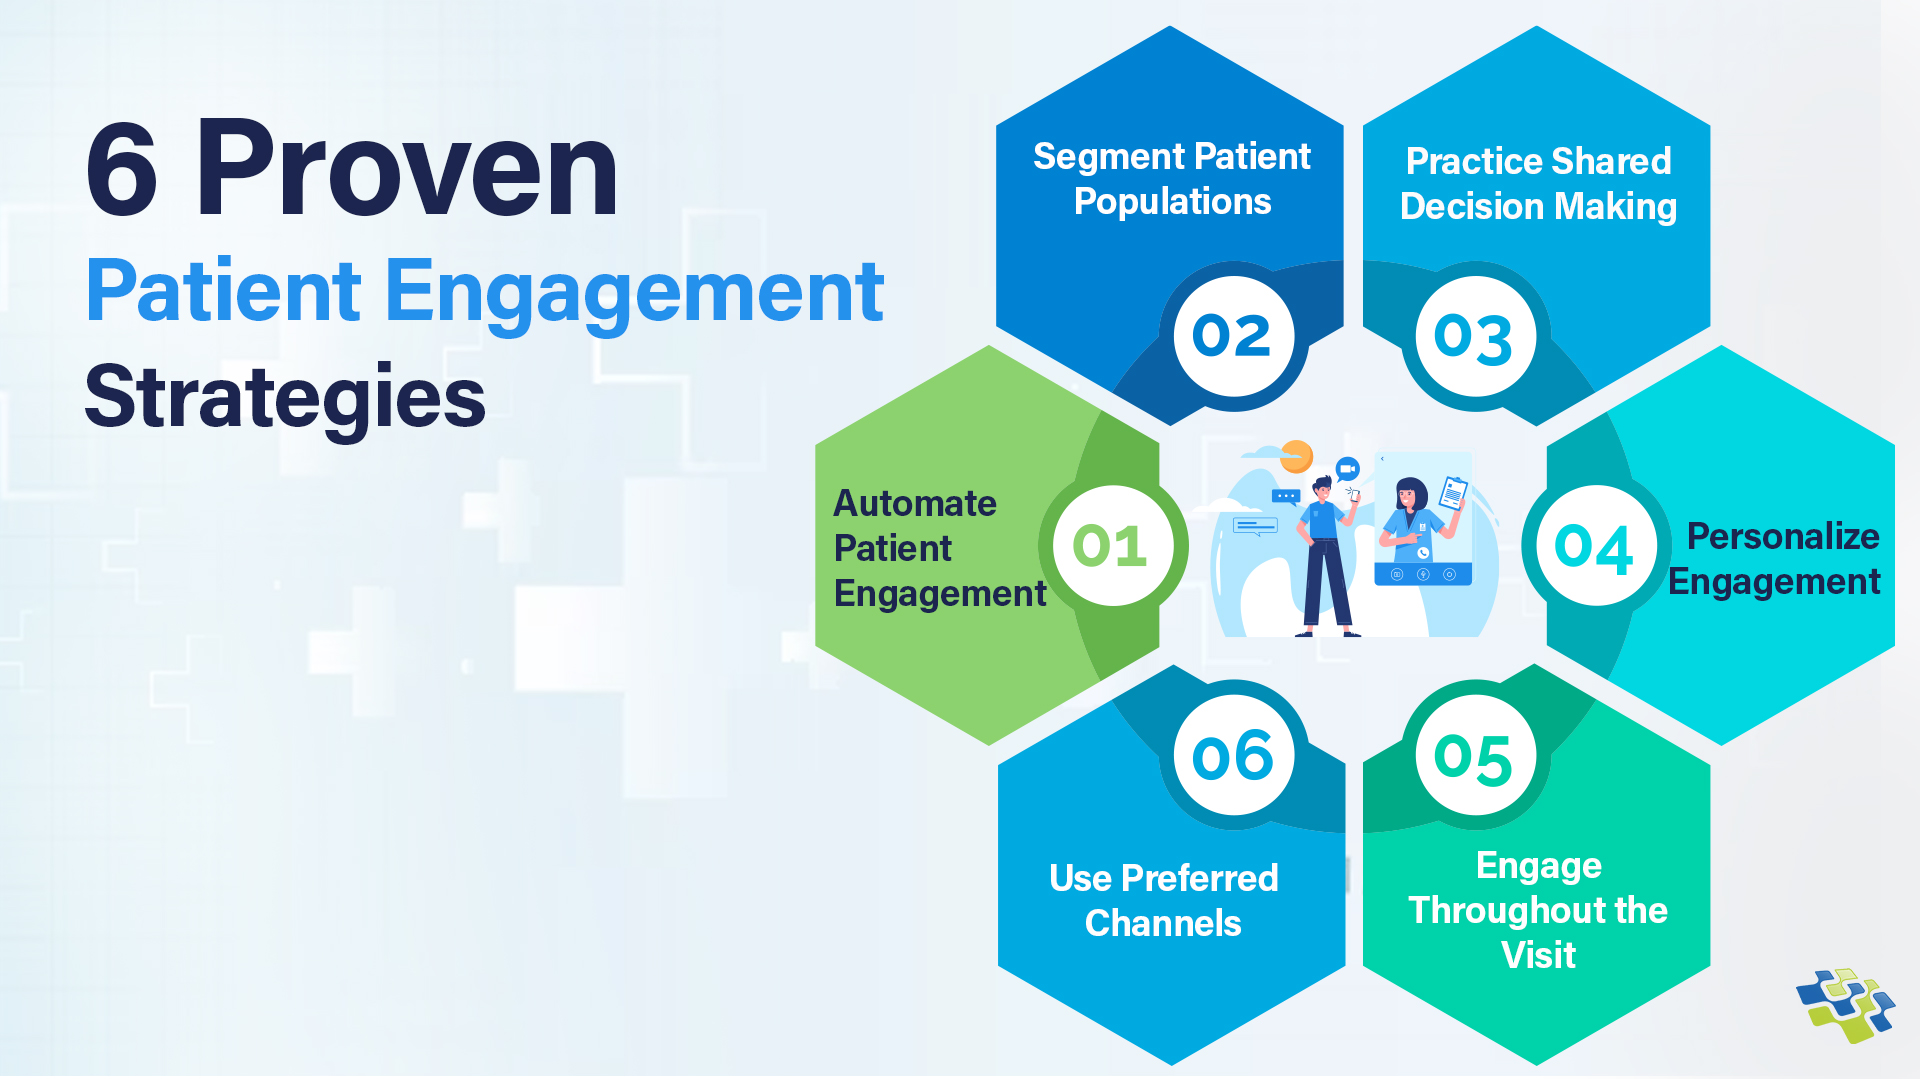 What is Patient Engagement?